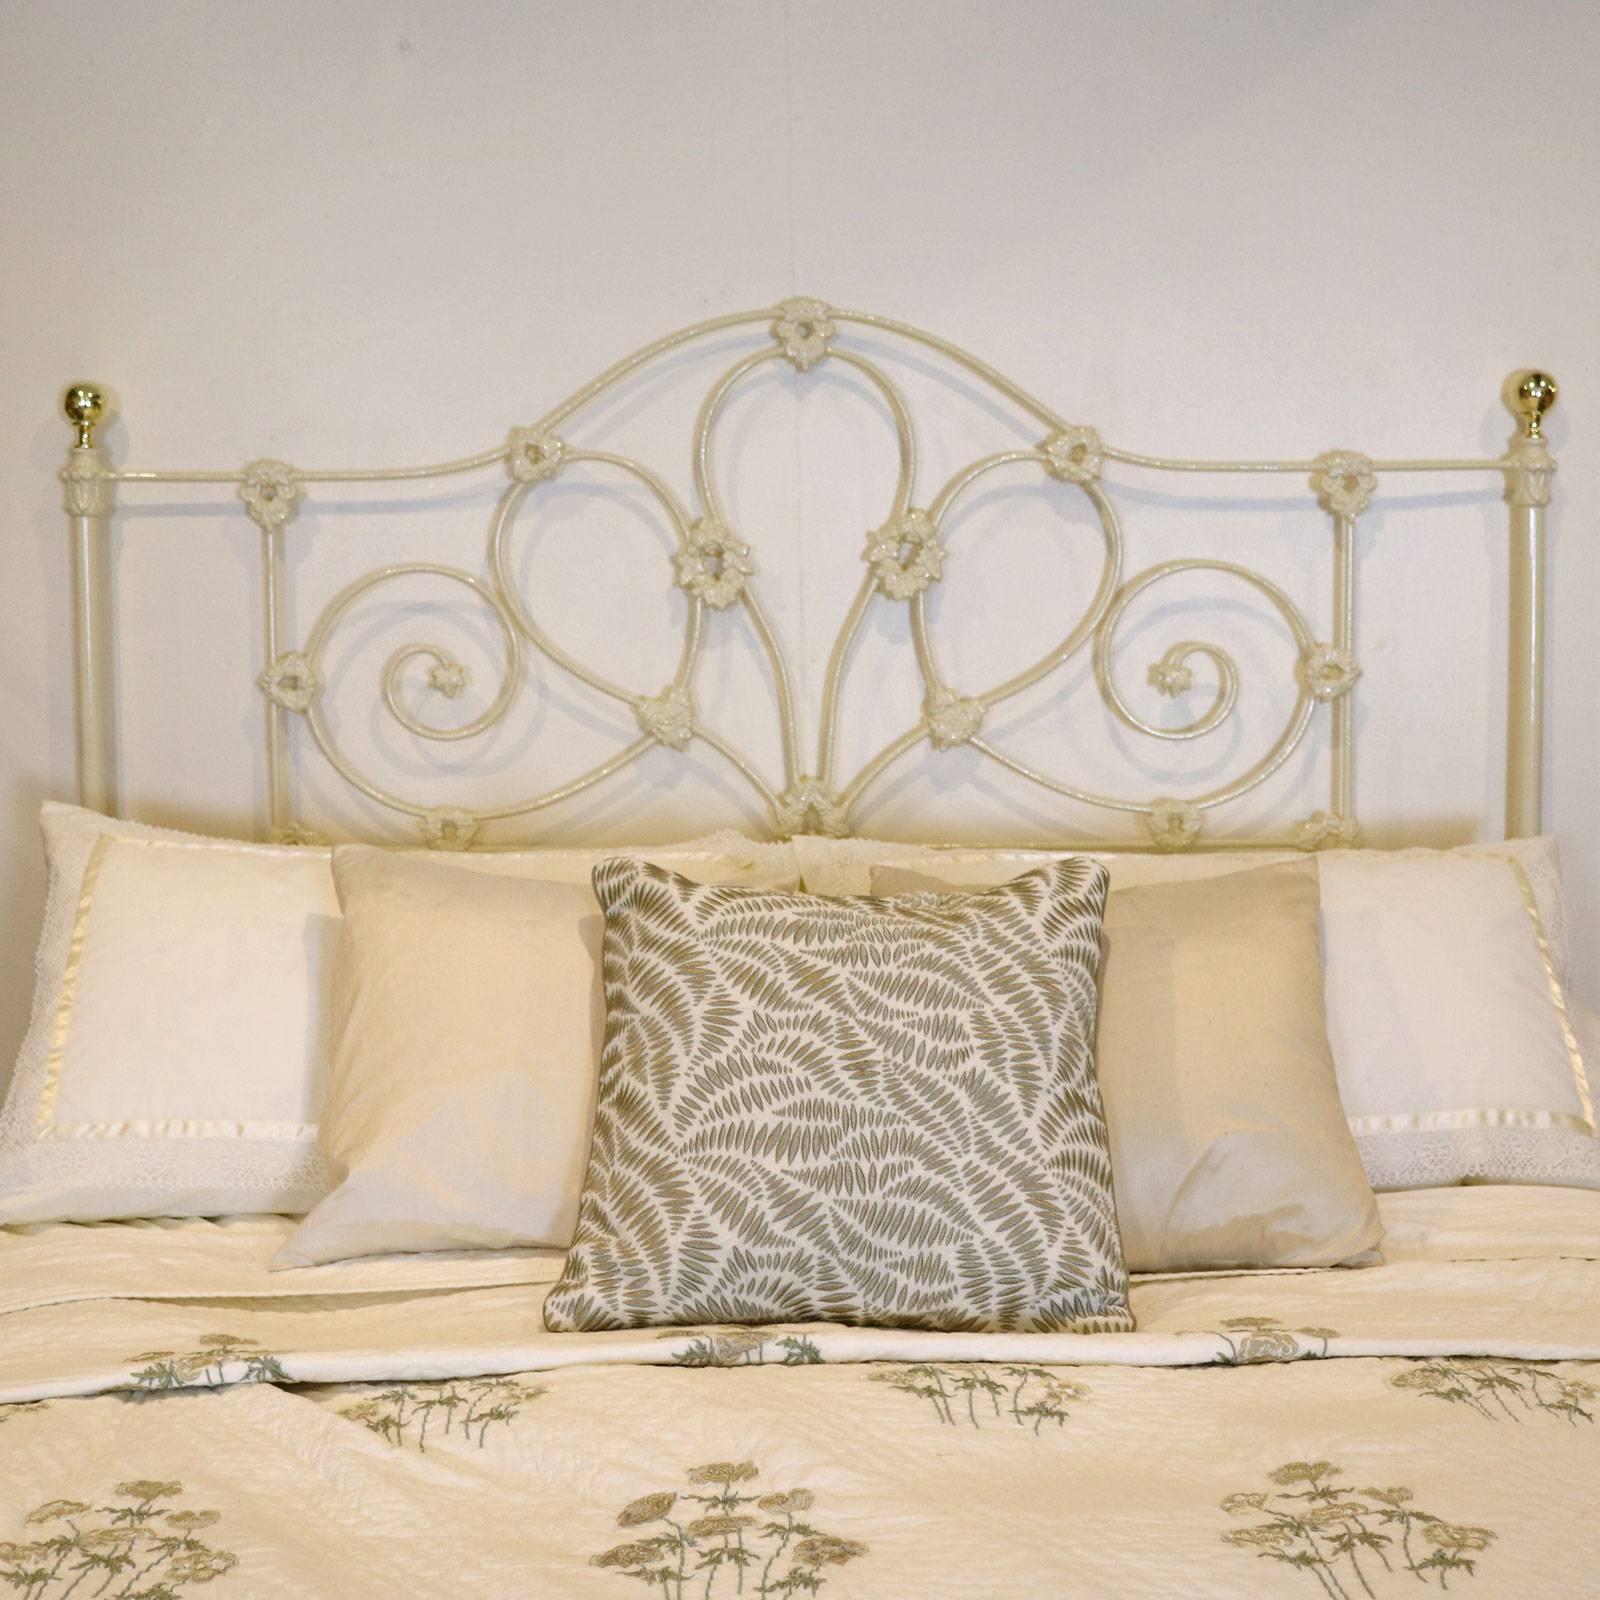 Quality mid Victorian cast iron bed with superbly cast panel decoration. This bed is finished in stove enamel cream but could have a colour change to suit your requirements.

The bed accepts a British king-size (5ft wide, 60 in or 150 cm) or